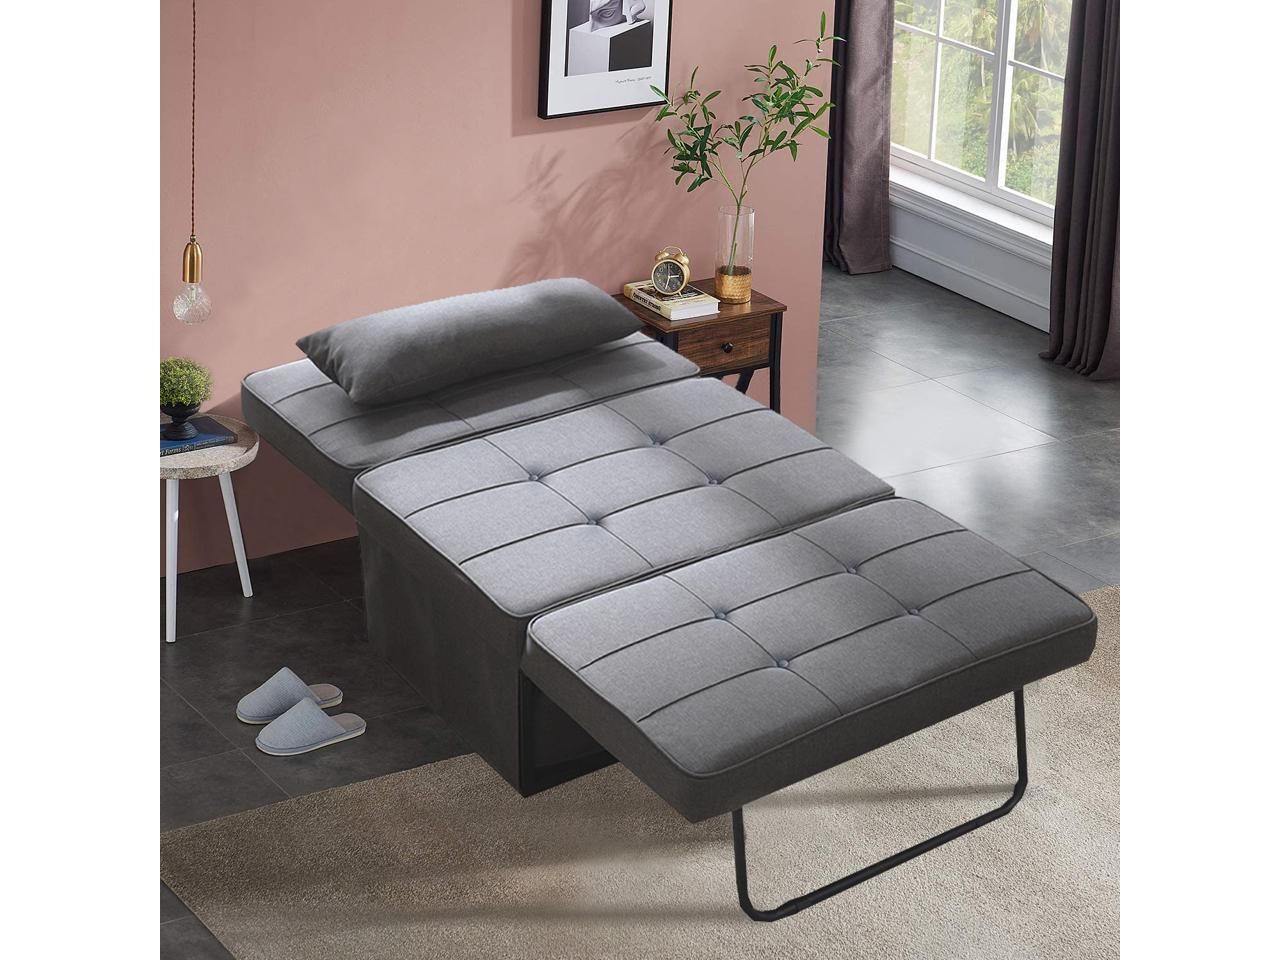 Googic Sofa Bed, Convertible Chair 4 In 1 Multi Function Folding Within Light Gray Fold Out Sleeper Ottomans (View 2 of 20)